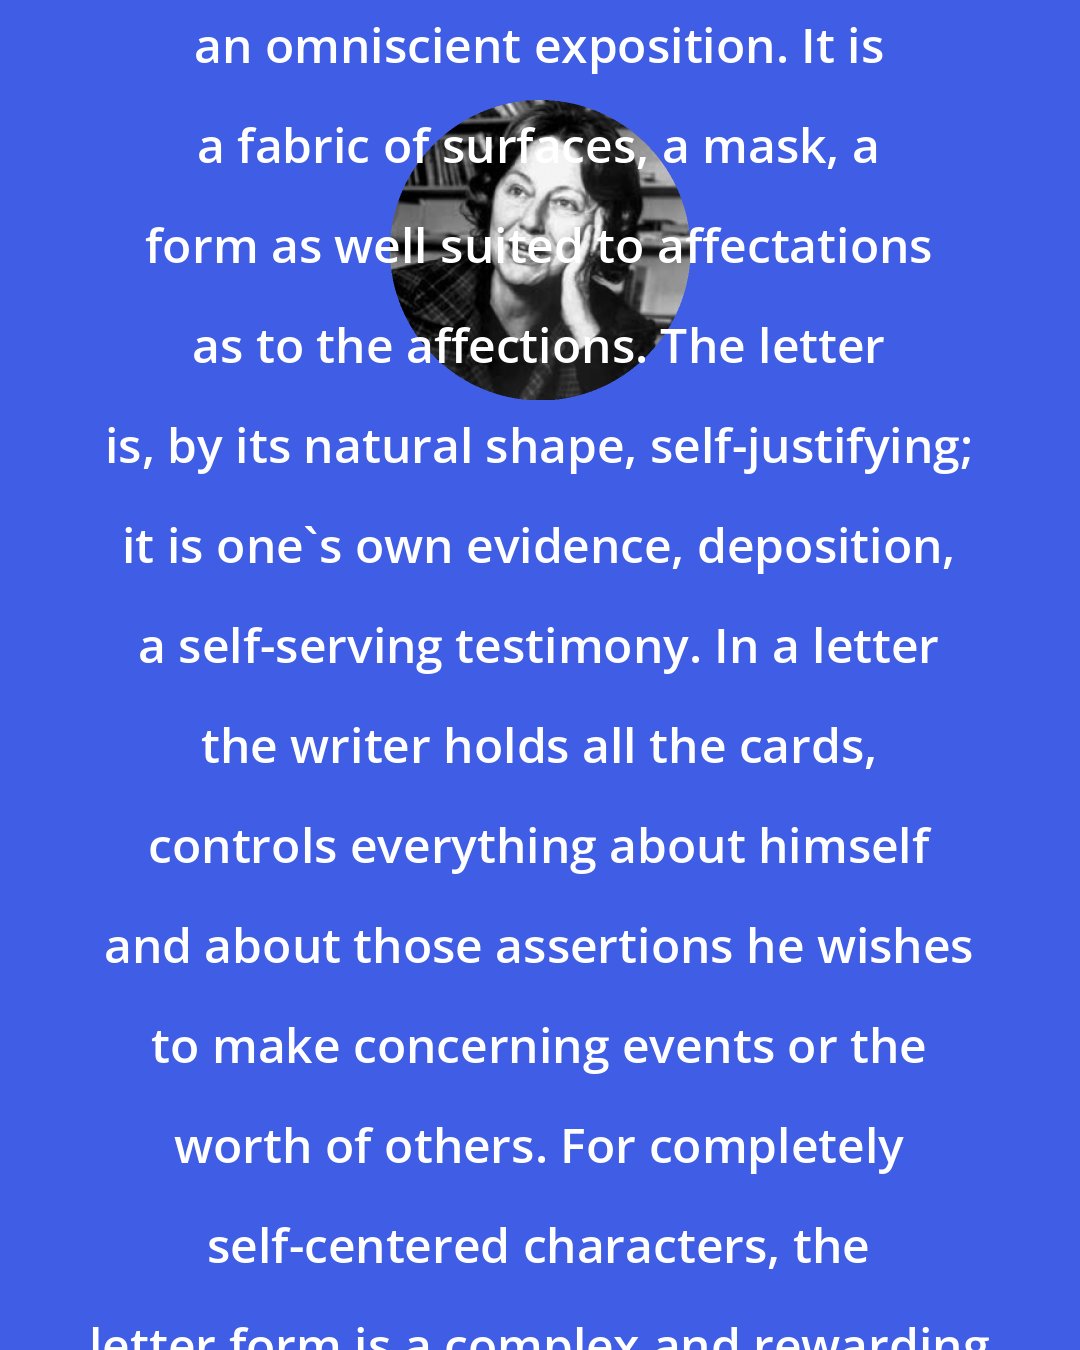 Elizabeth Hardwick: A letter is not a dialogue or even an omniscient exposition. It is a fabric of surfaces, a mask, a form as well suited to affectations as to the affections. The letter is, by its natural shape, self-justifying; it is one's own evidence, deposition, a self-serving testimony. In a letter the writer holds all the cards, controls everything about himself and about those assertions he wishes to make concerning events or the worth of others. For completely self-centered characters, the letter form is a complex and rewarding activity.